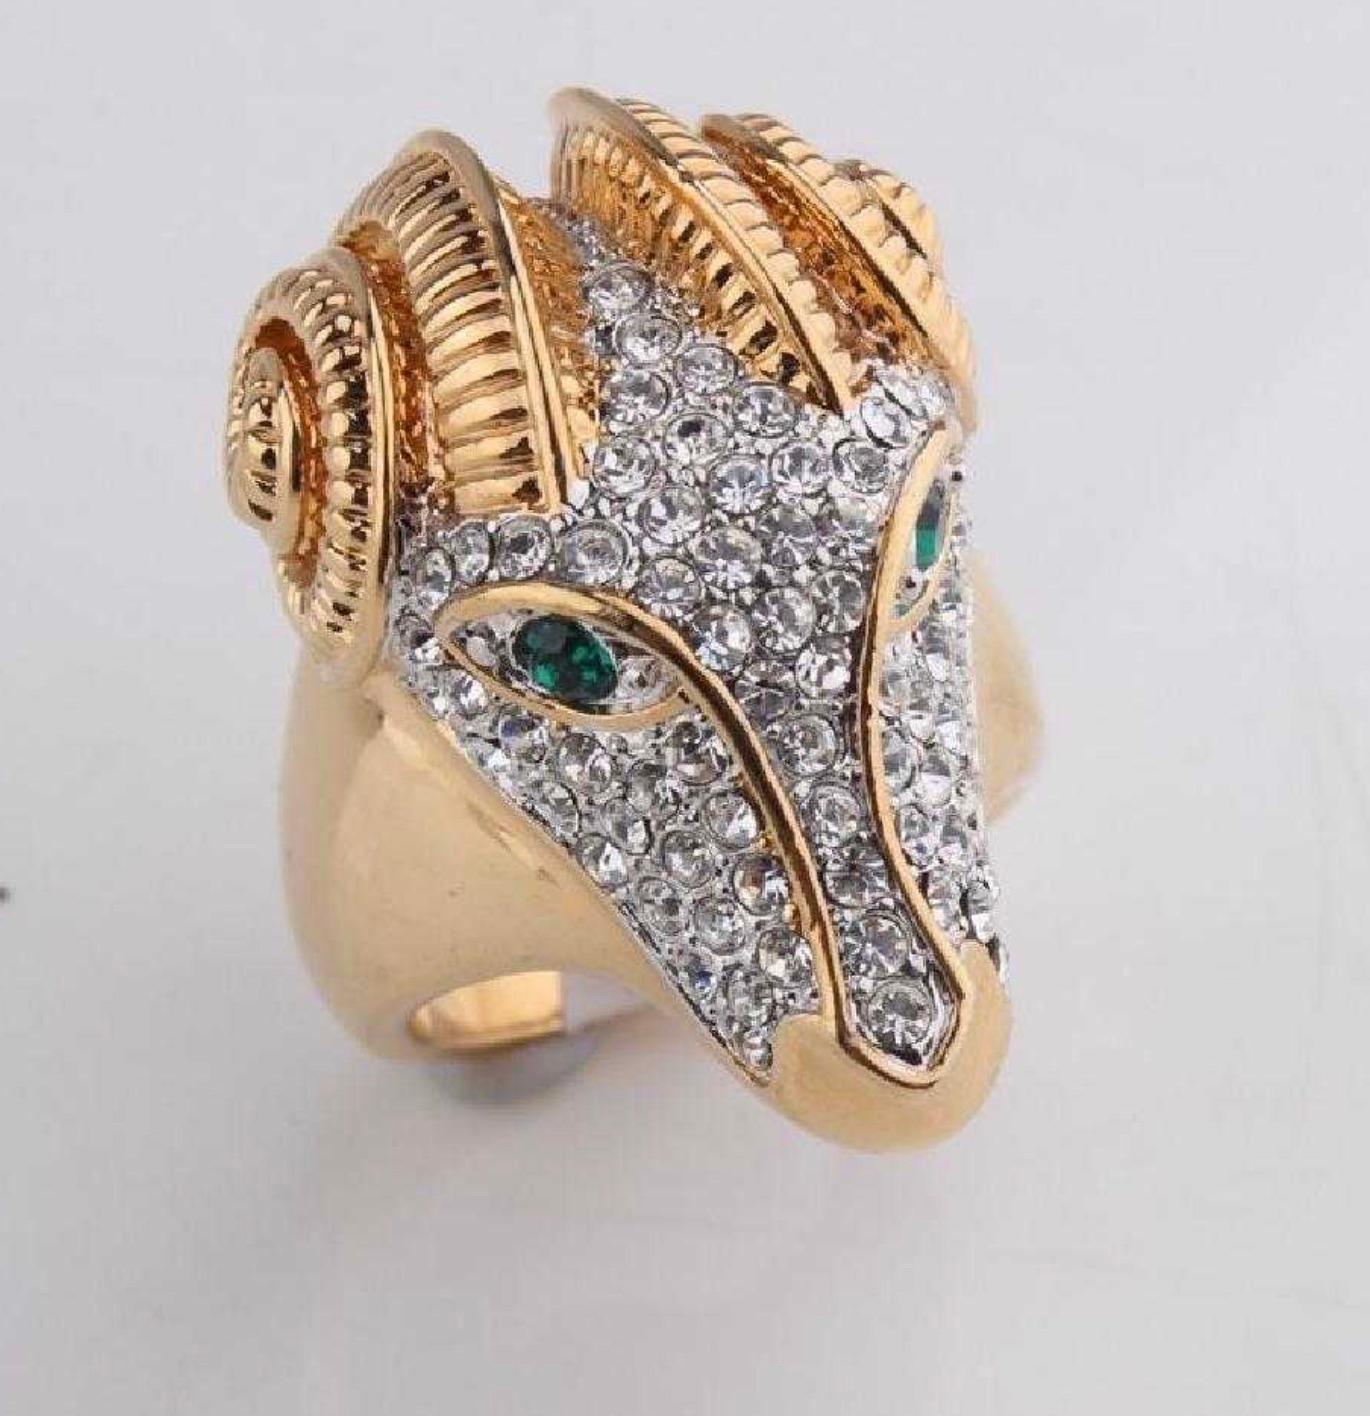 Impressive Large Ram Head Ring made to Impress!

Beautiful Ram Head 18k Gold Plated Ring: Size:9
CZ Pave Face with Faux Emerald Eyes
very good condition